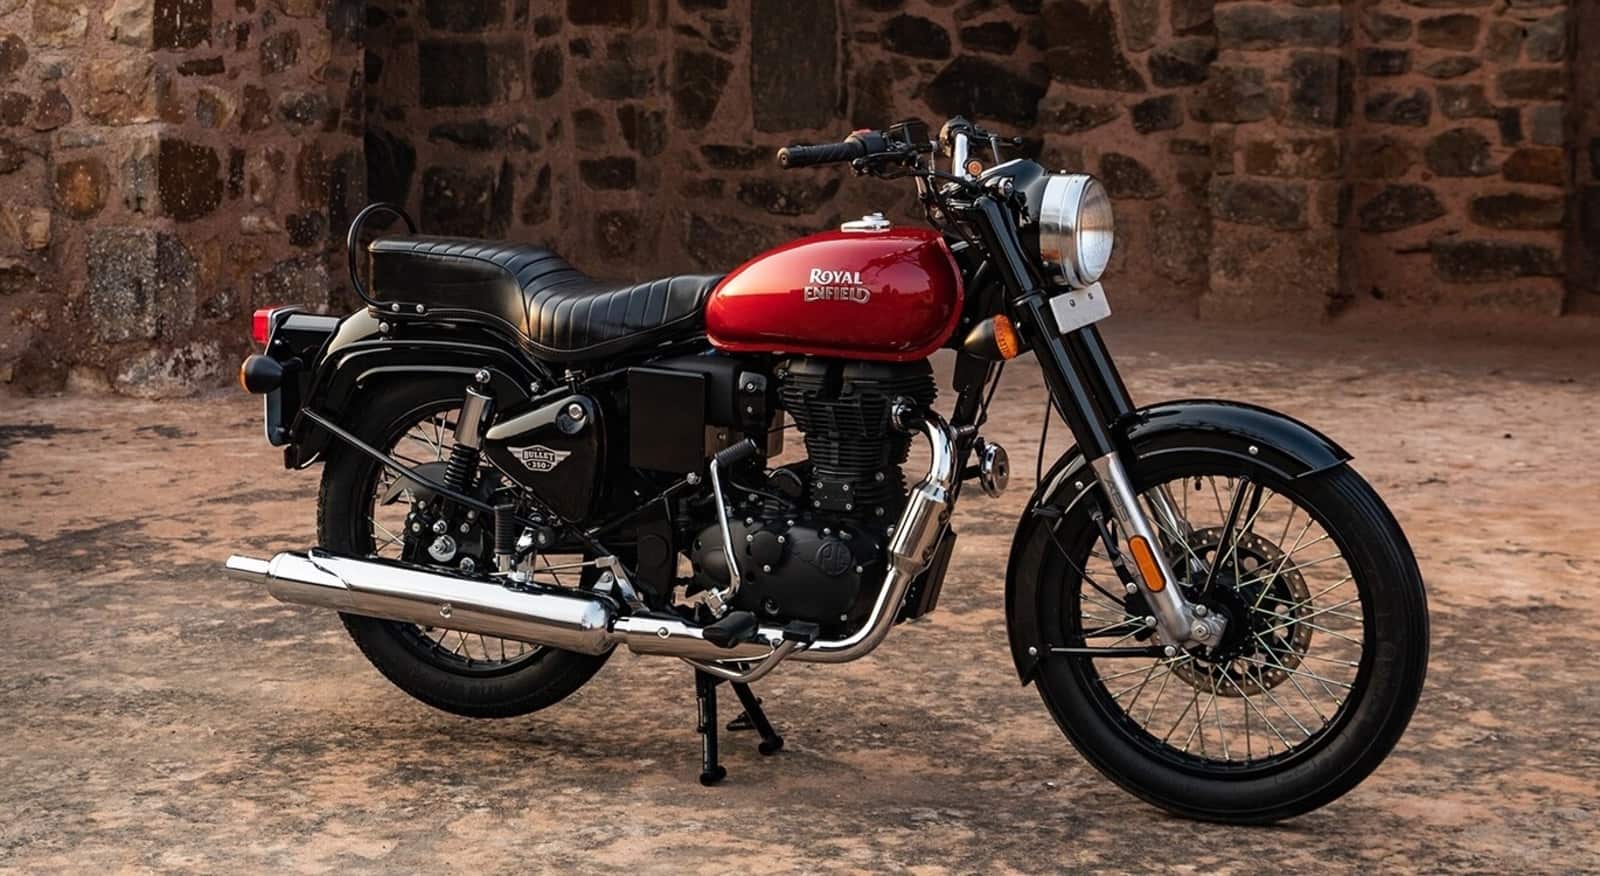 Next-Generation Royal Enfield Bullet 350 - 5 Things To Expect